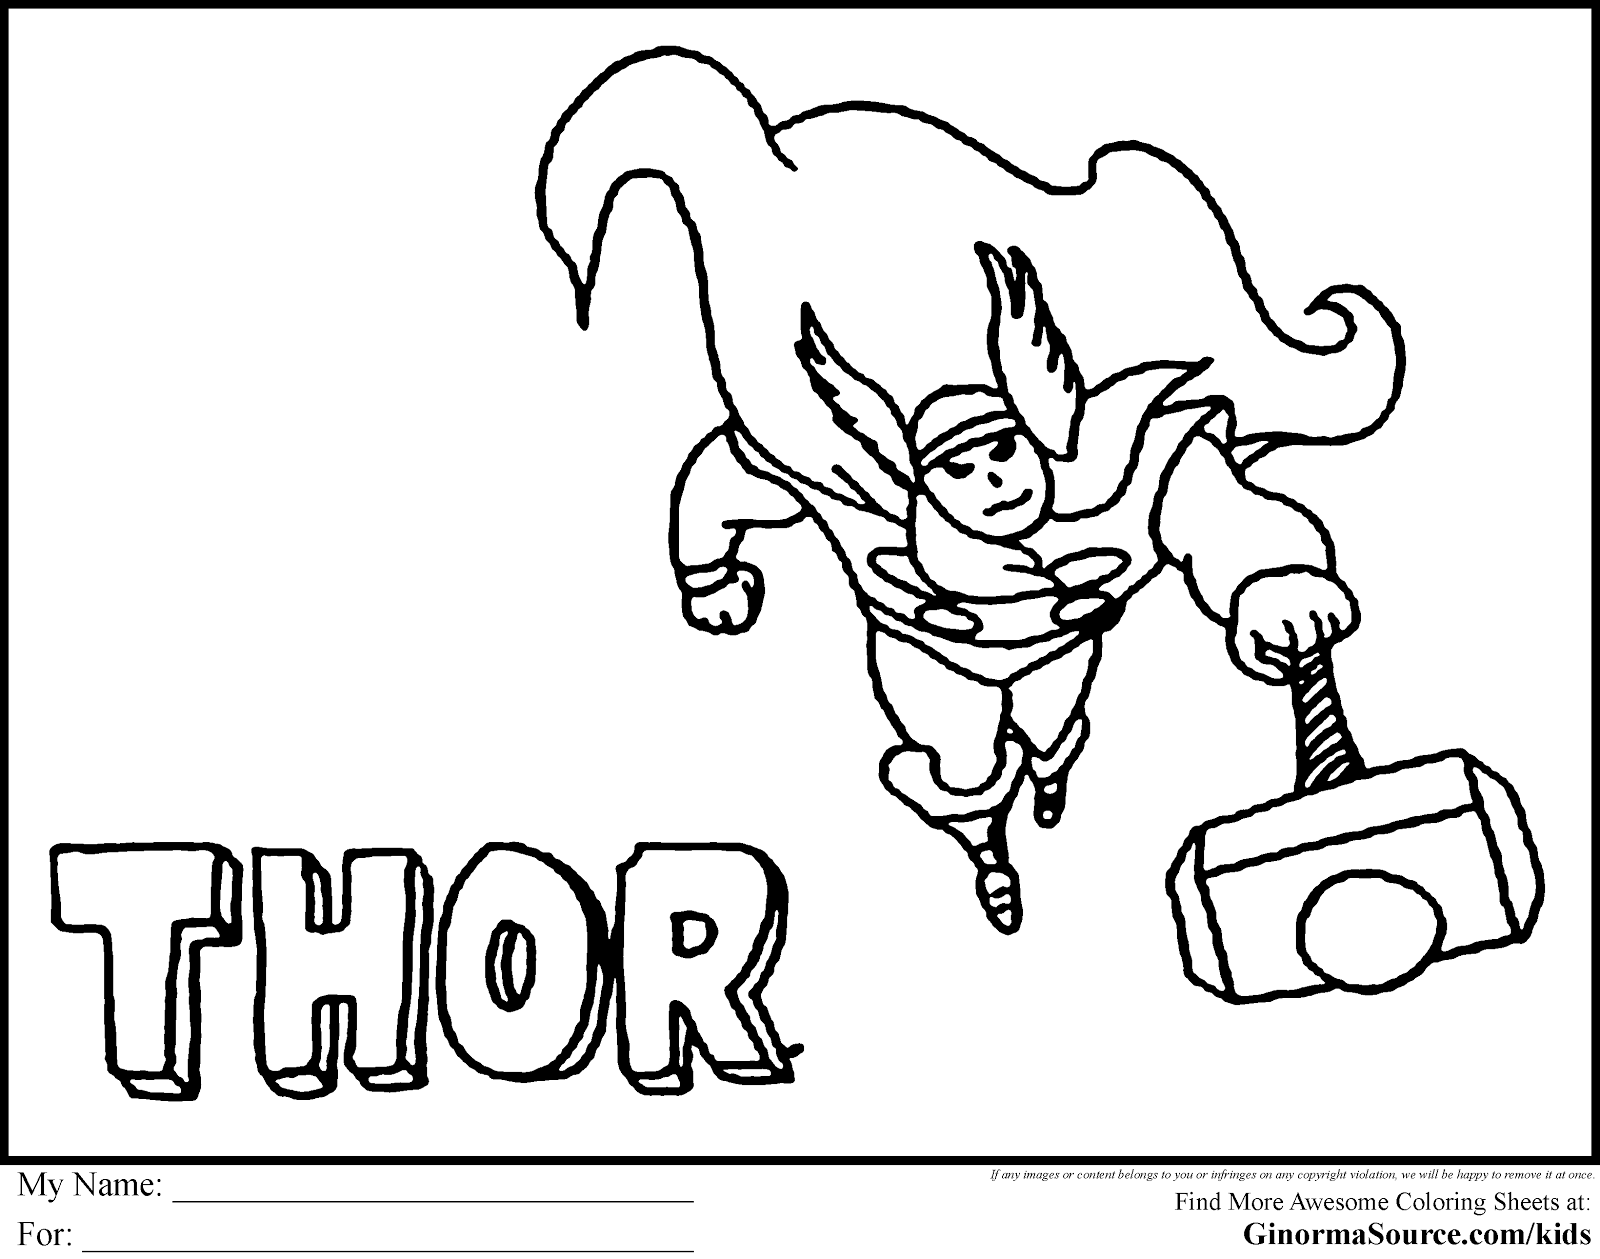 Avengers Logo Coloring Pages - High Quality Coloring Pages